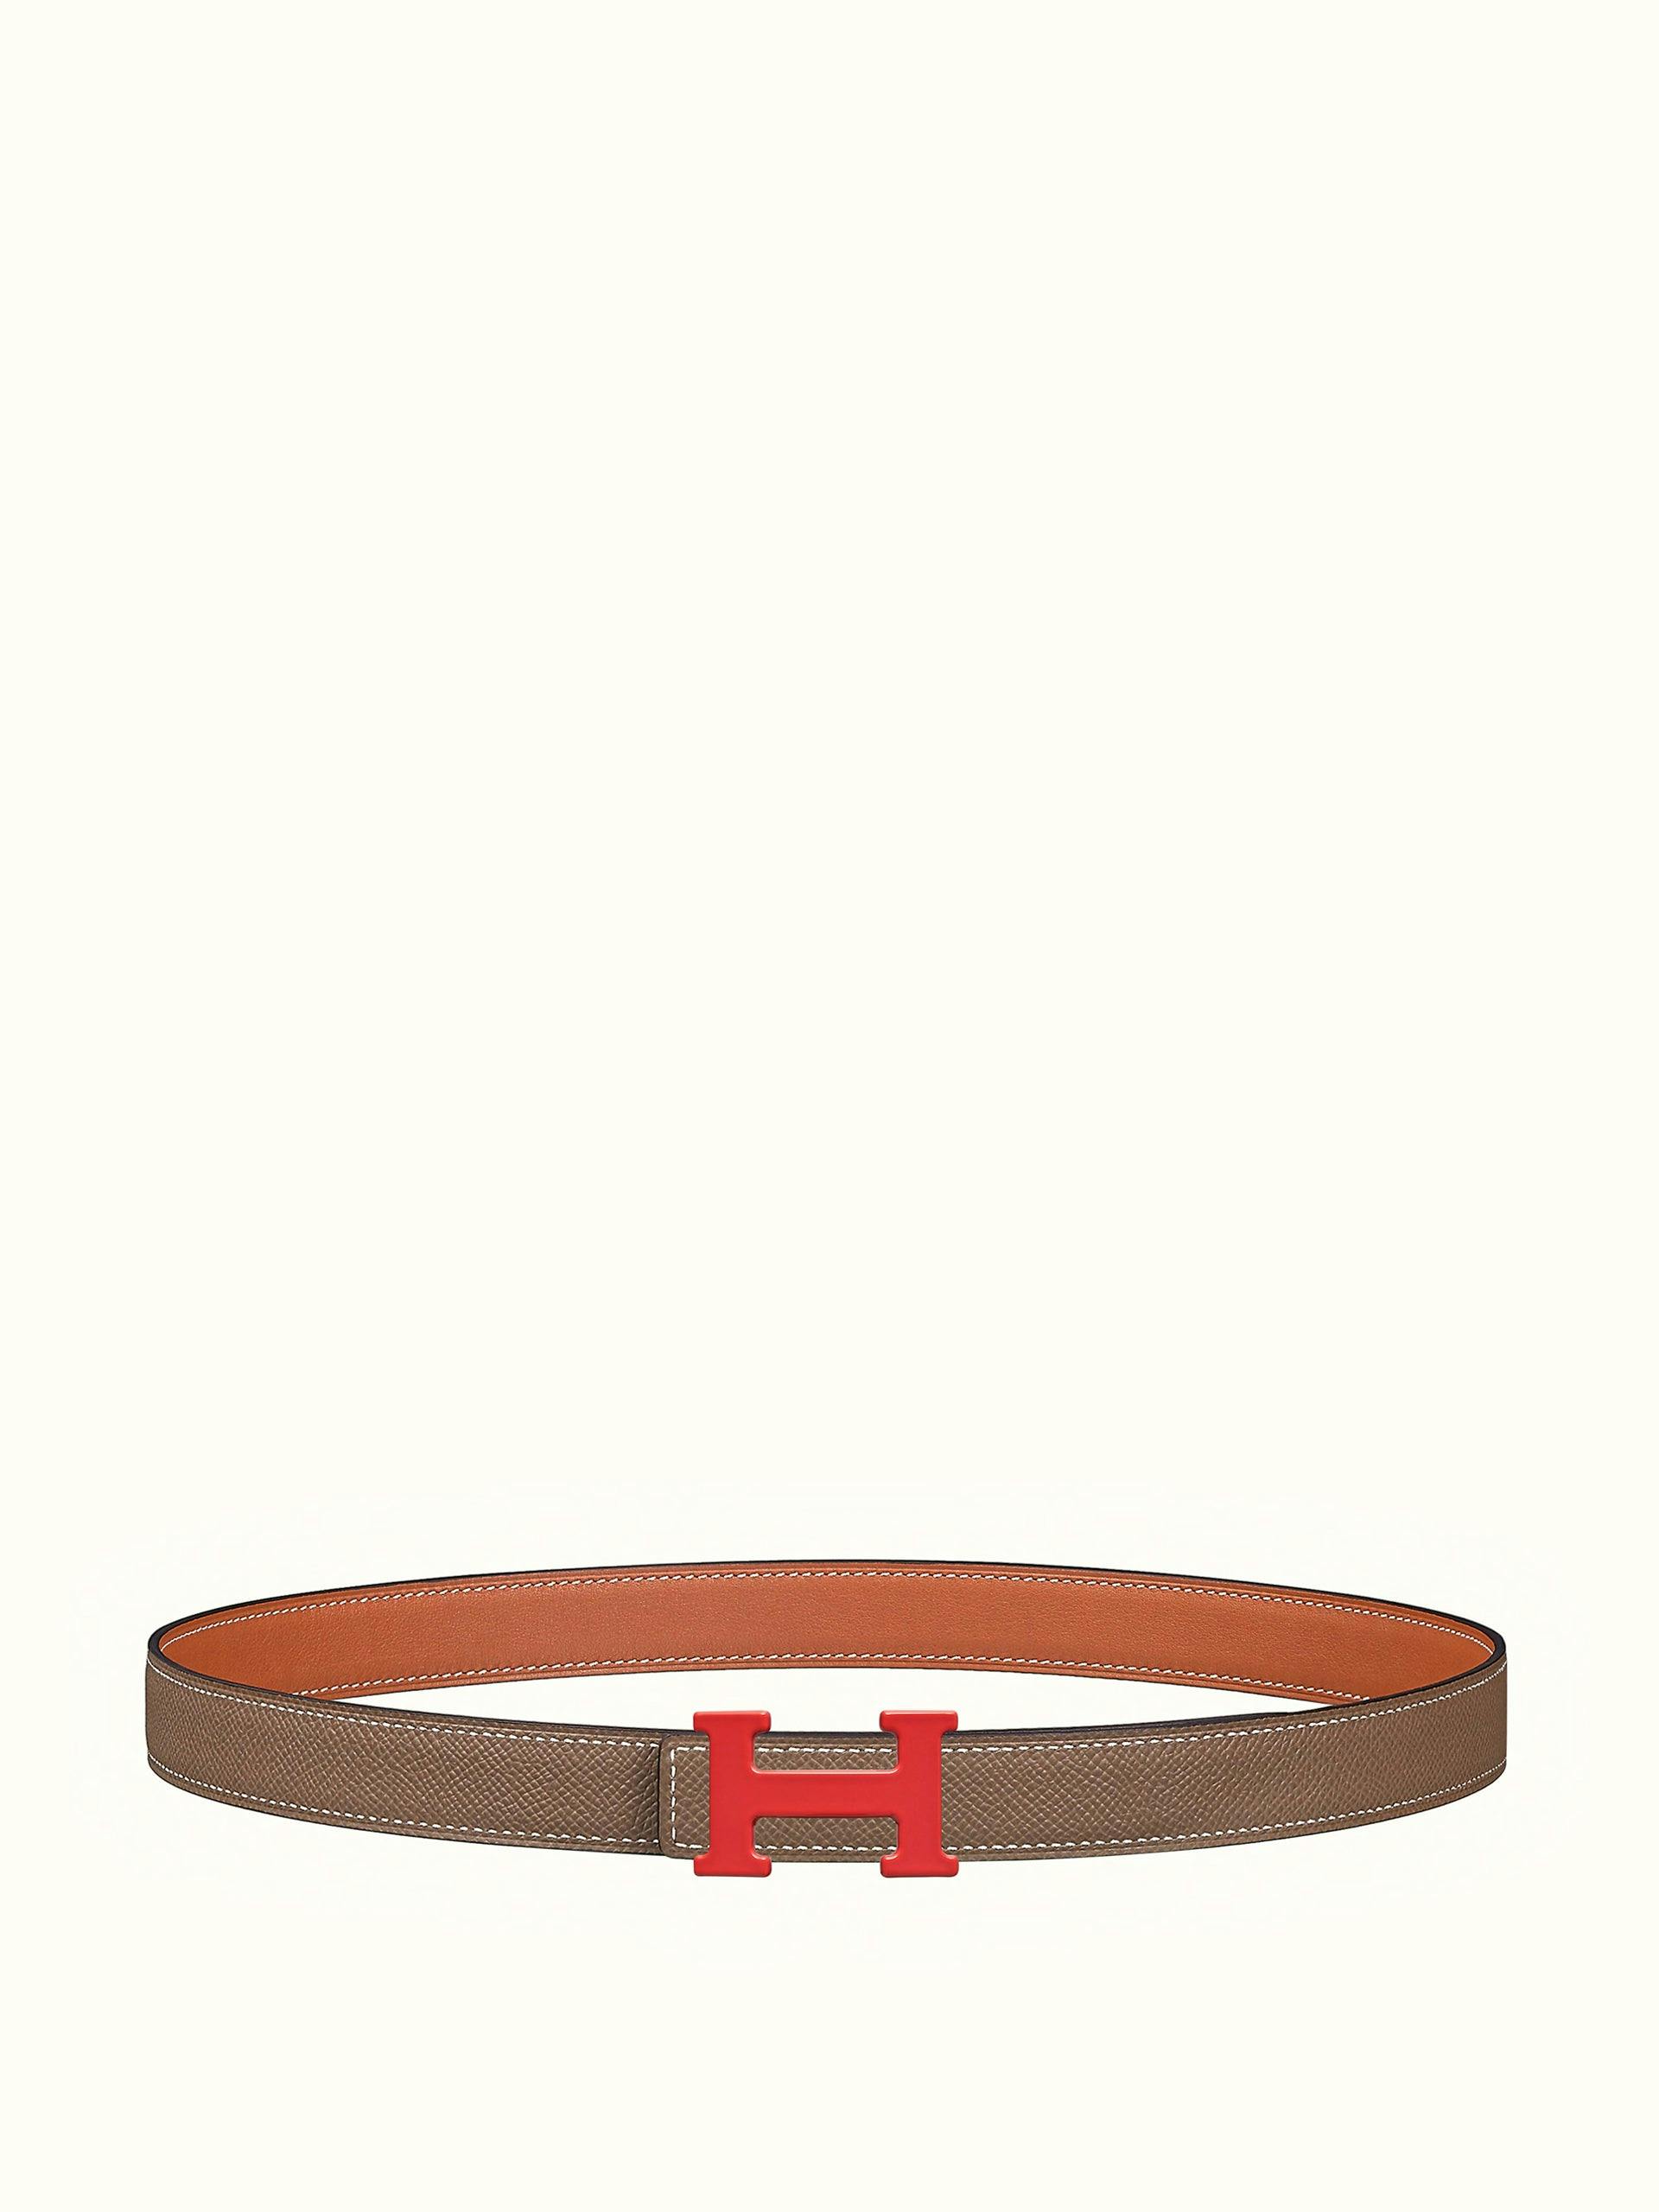 Brown leather belt with logo buckle